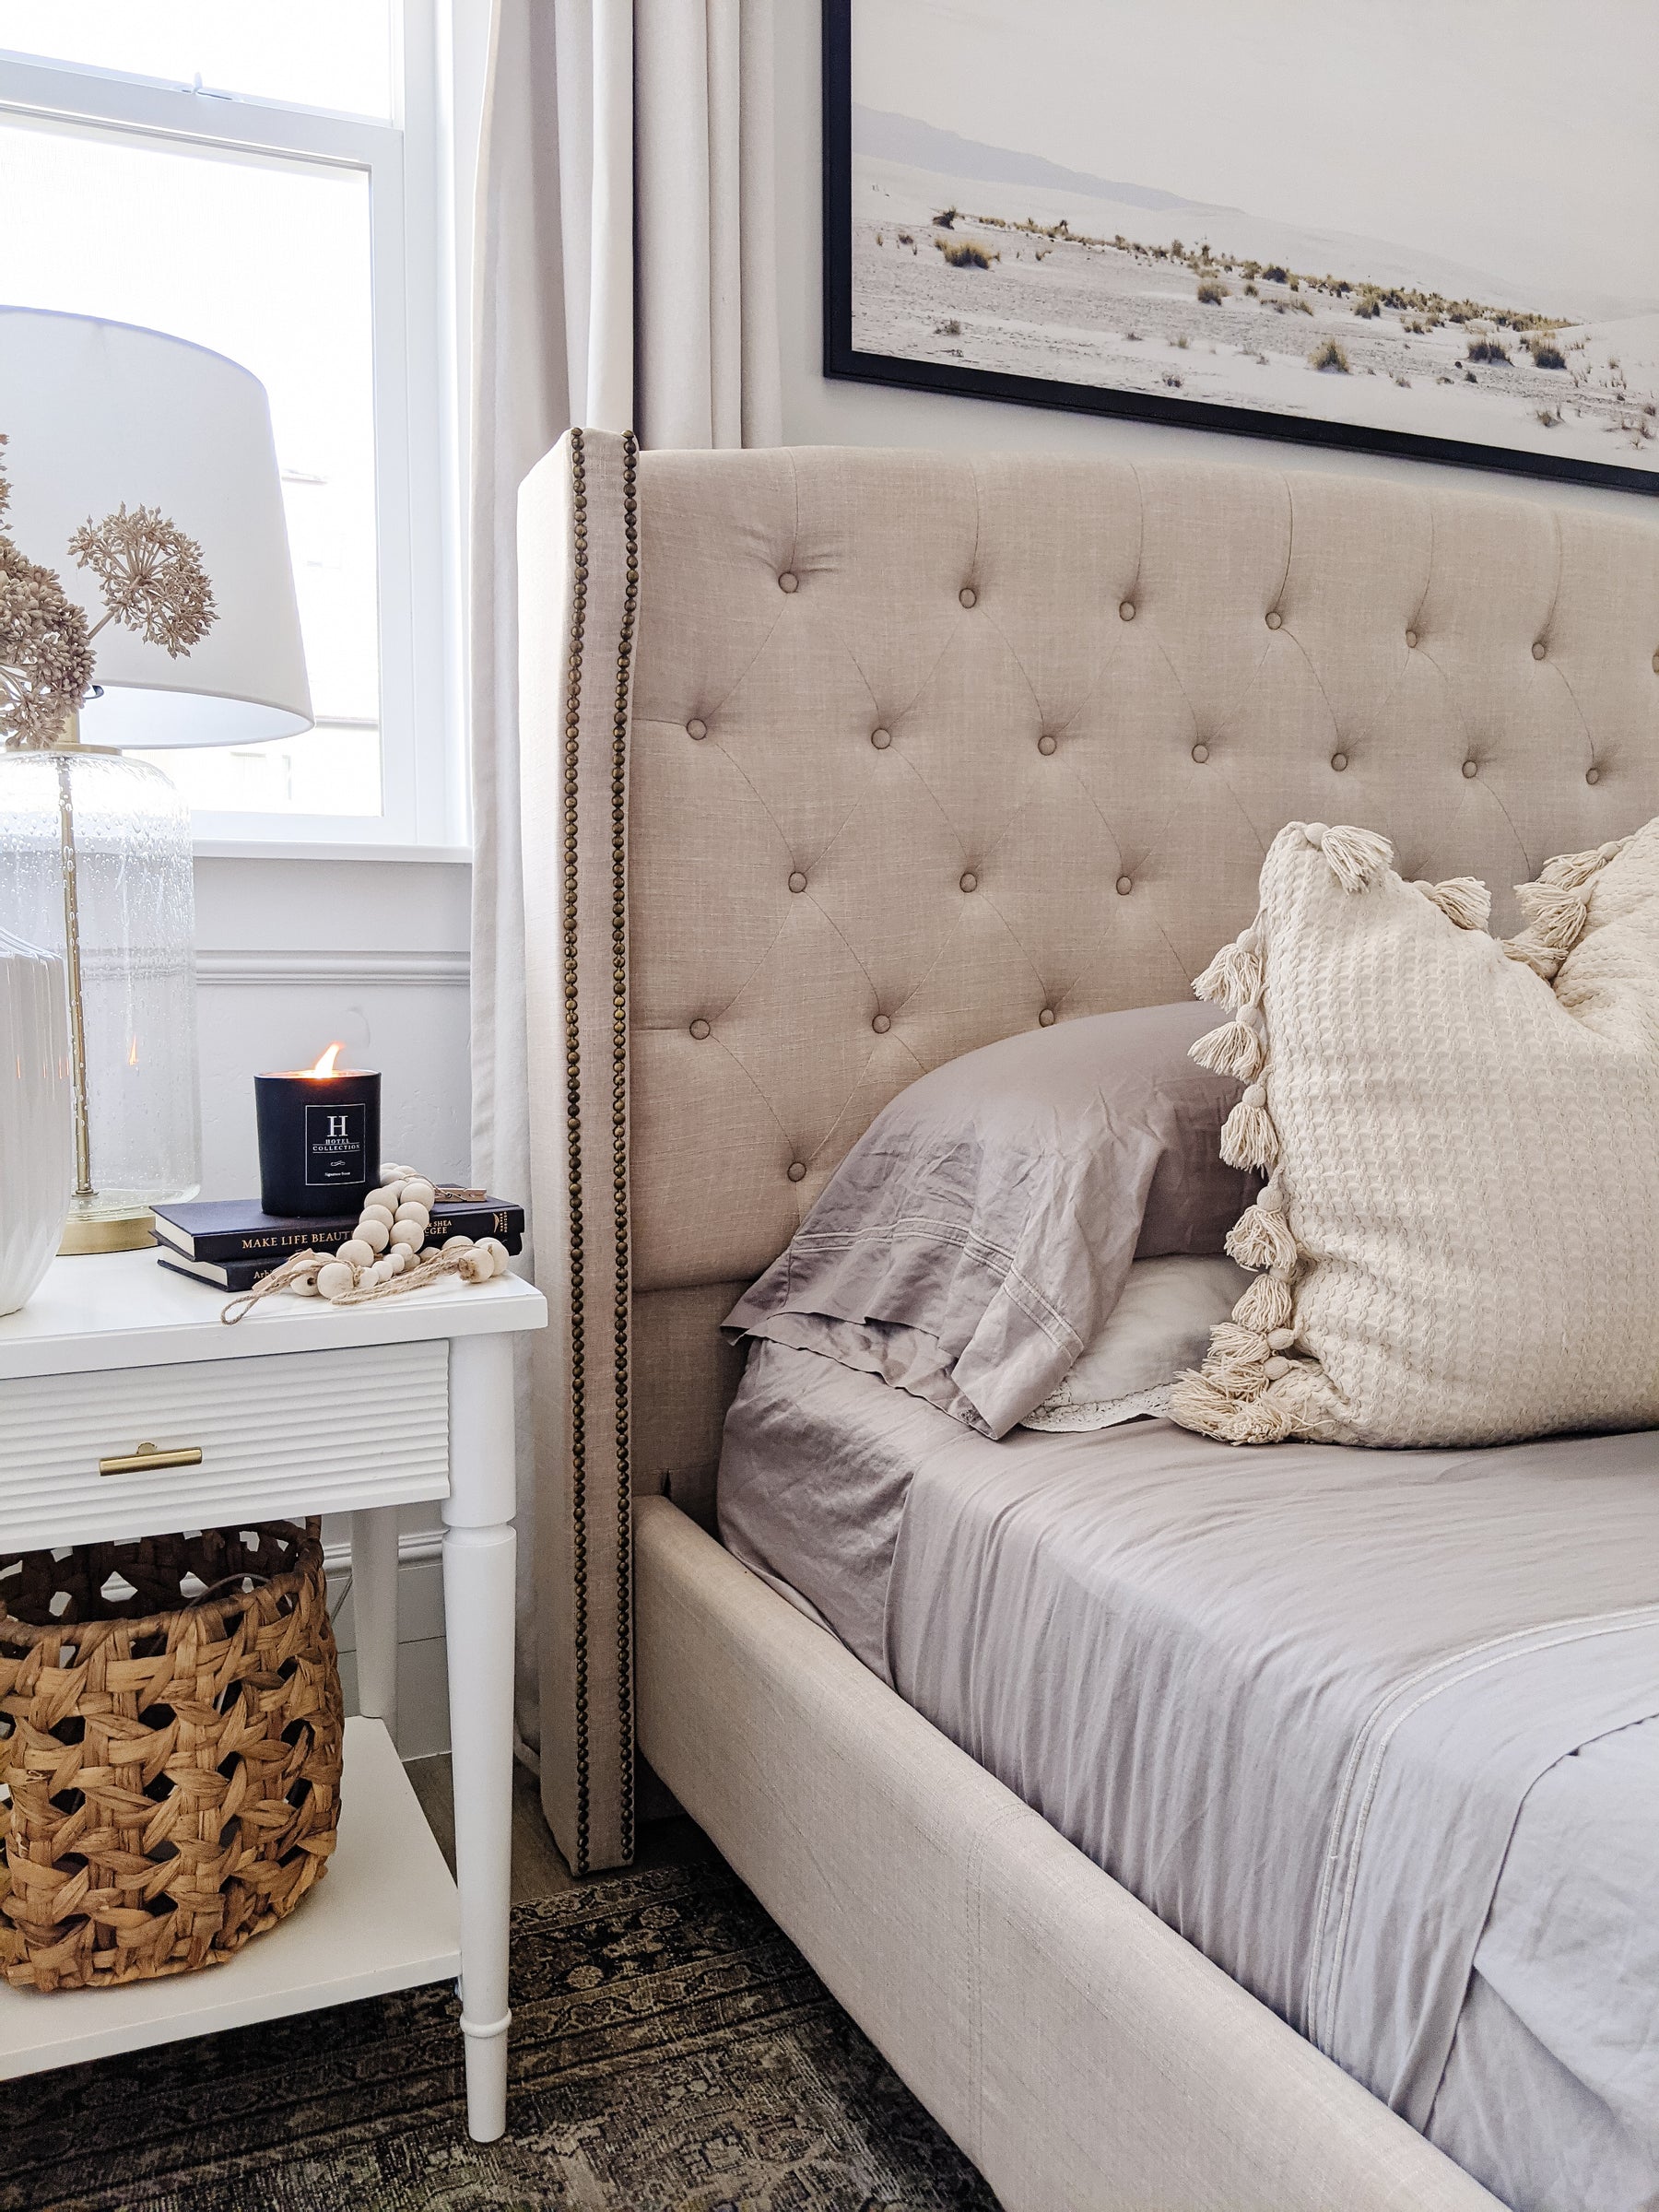 HOW TO MAKE YOUR BEDROOM COZIER FOR THE HOLIDAYS - hygge cave